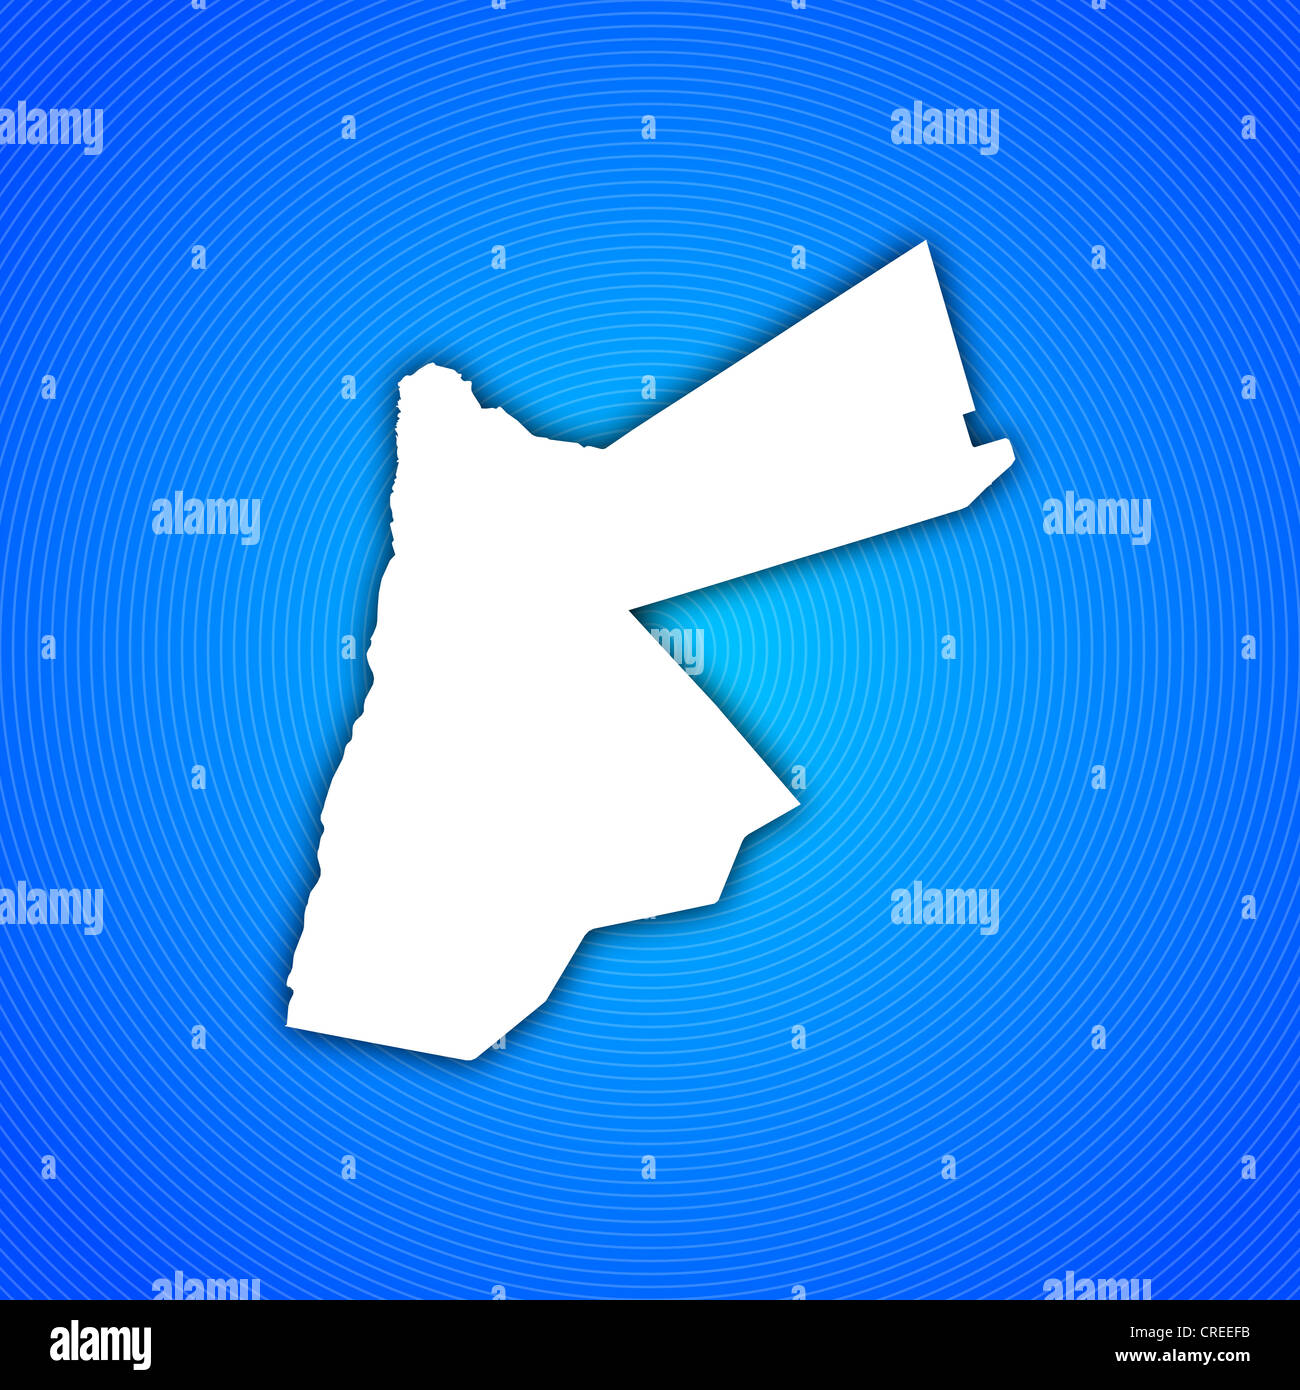 Political map of Jordan with the several governorates. Stock Photo